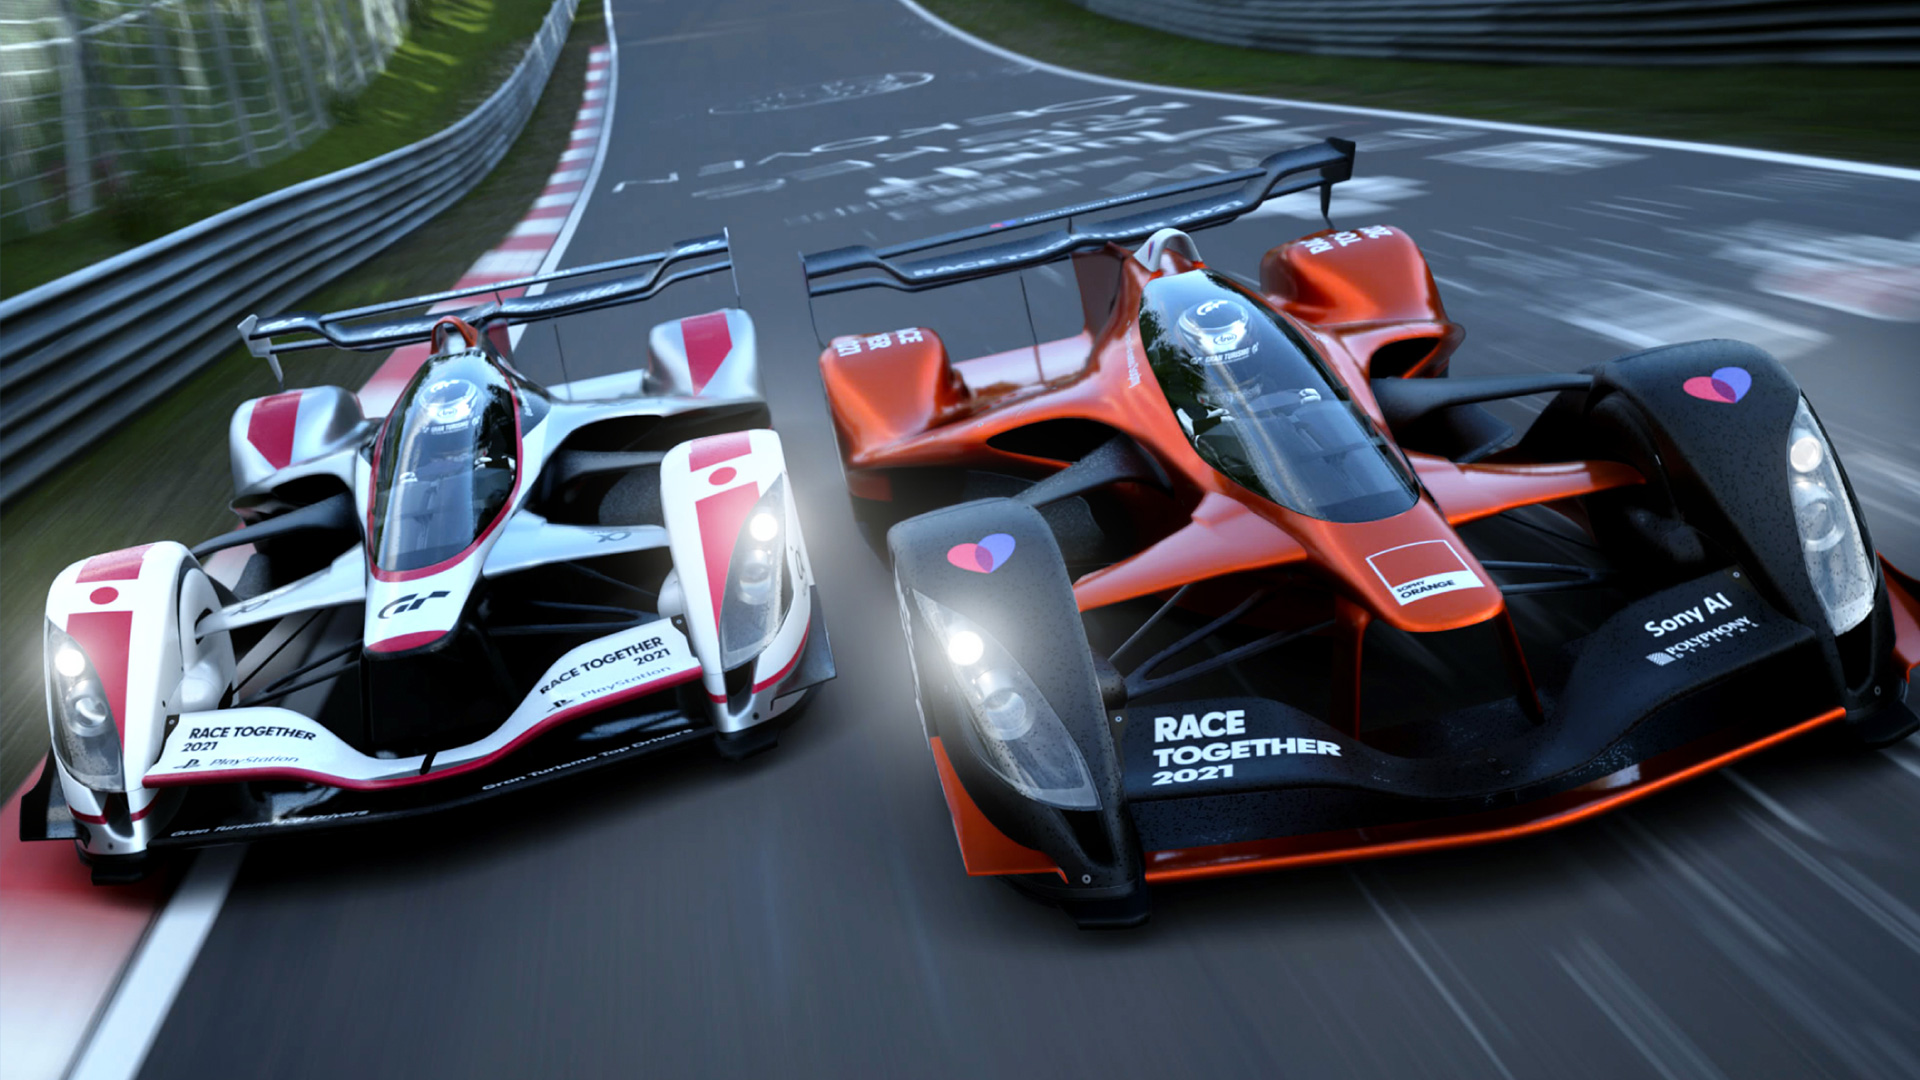 Two formula race cars race side by side. The car on the left is white. The car on the right is orange.